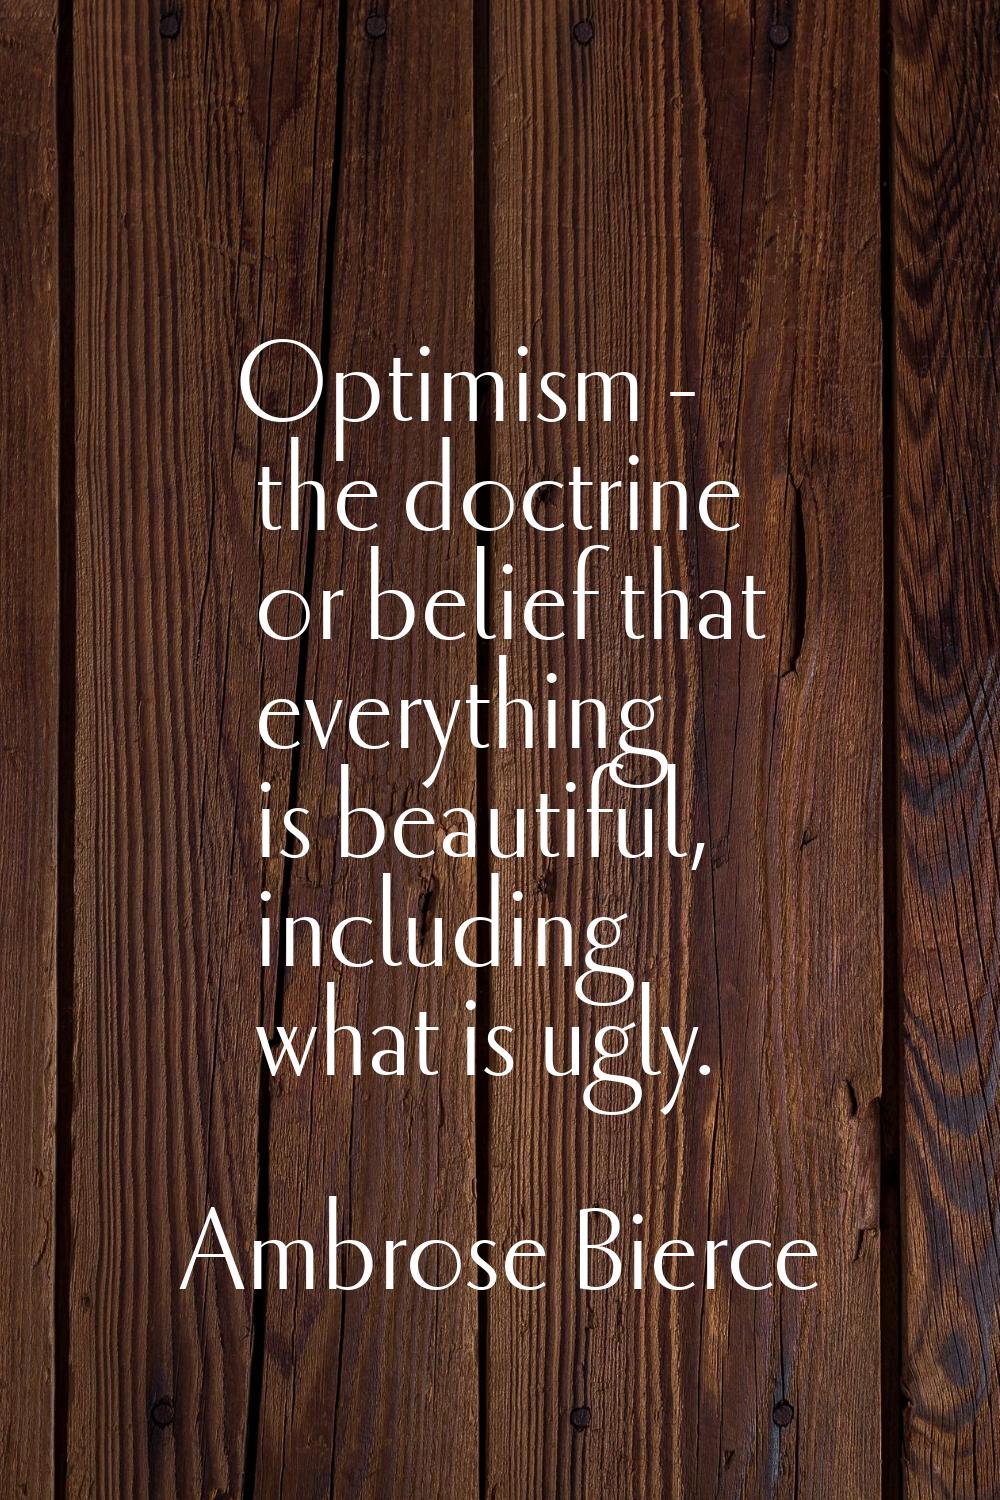 Optimism - the doctrine or belief that everything is beautiful, including what is ugly.